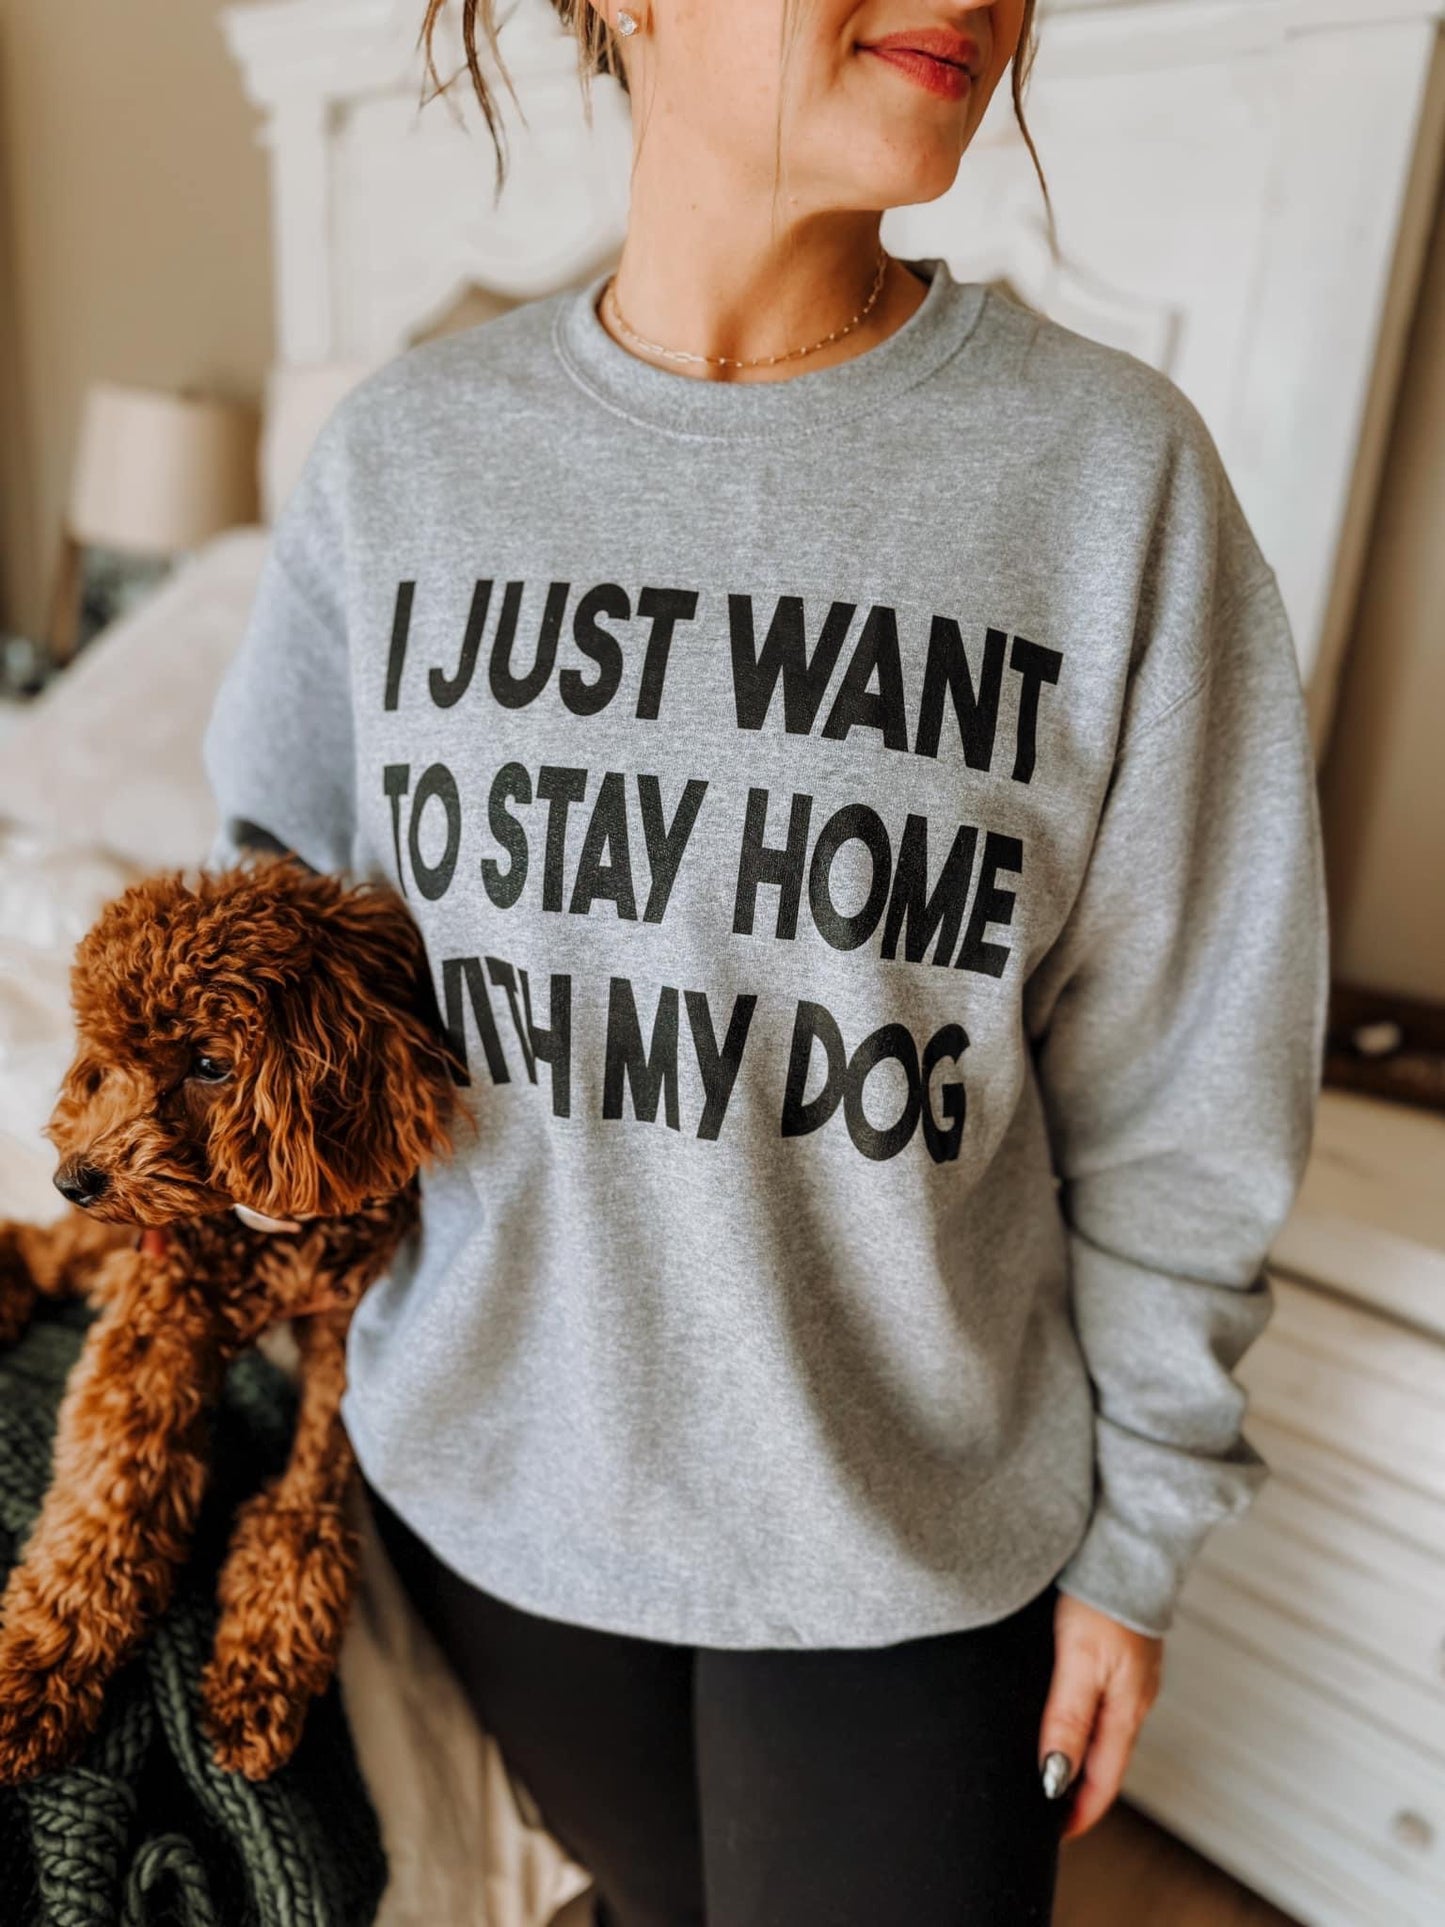 The I Just Want to Stay Home With My Dog Sweatshirt